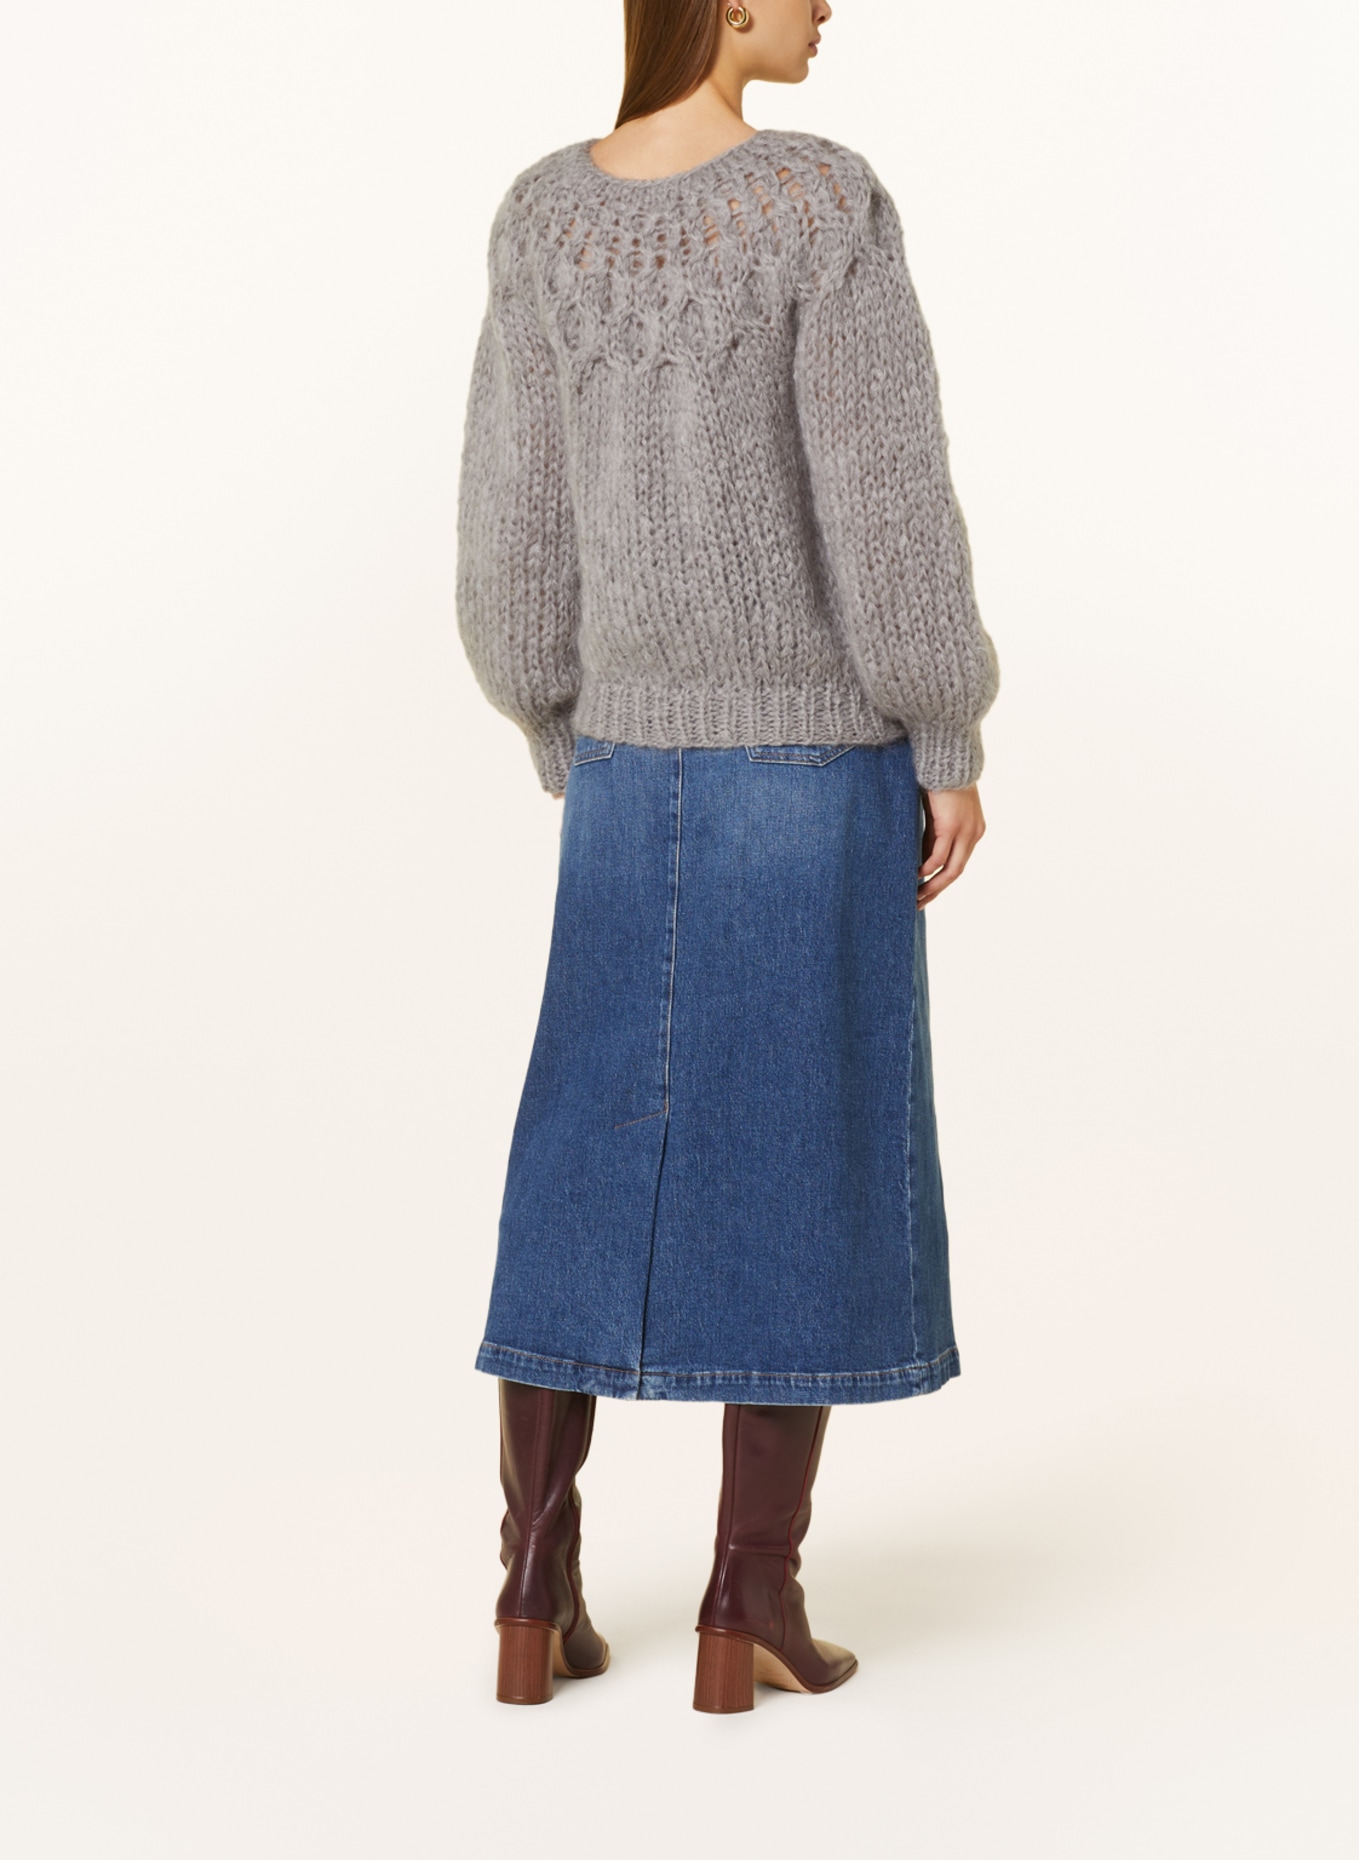 MAIAMI Mohair sweater, Color: GRAY (Image 3)